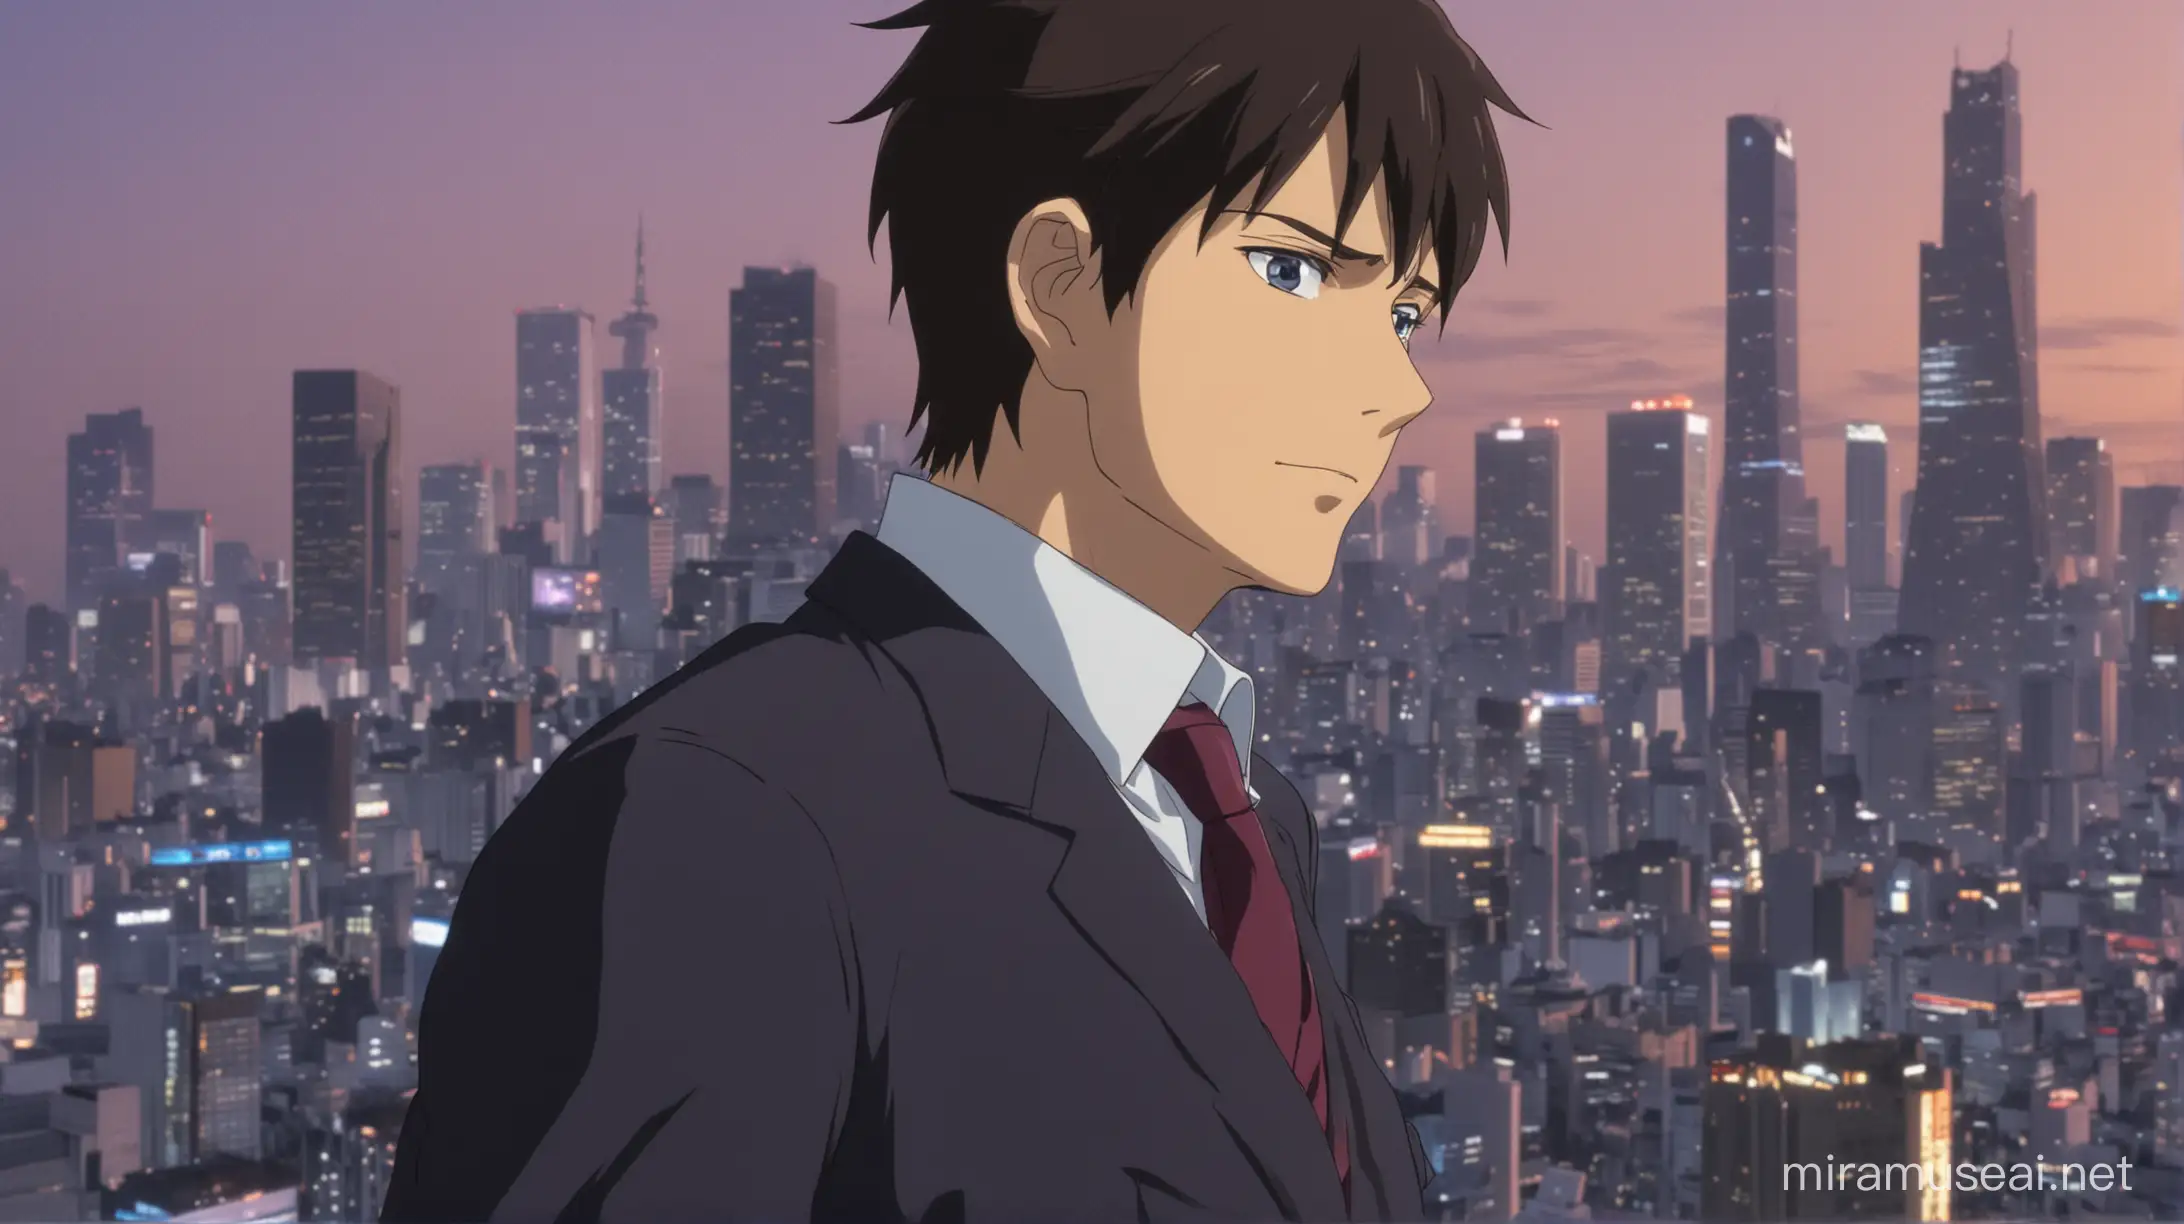 Anime, Tokyo middle aged Business man Kaito, standing on a rooftop, gazing out at the Tokyo Skyline.
Show close-up shots of Kaito's troubled expression as he contemplates the uncertain future.